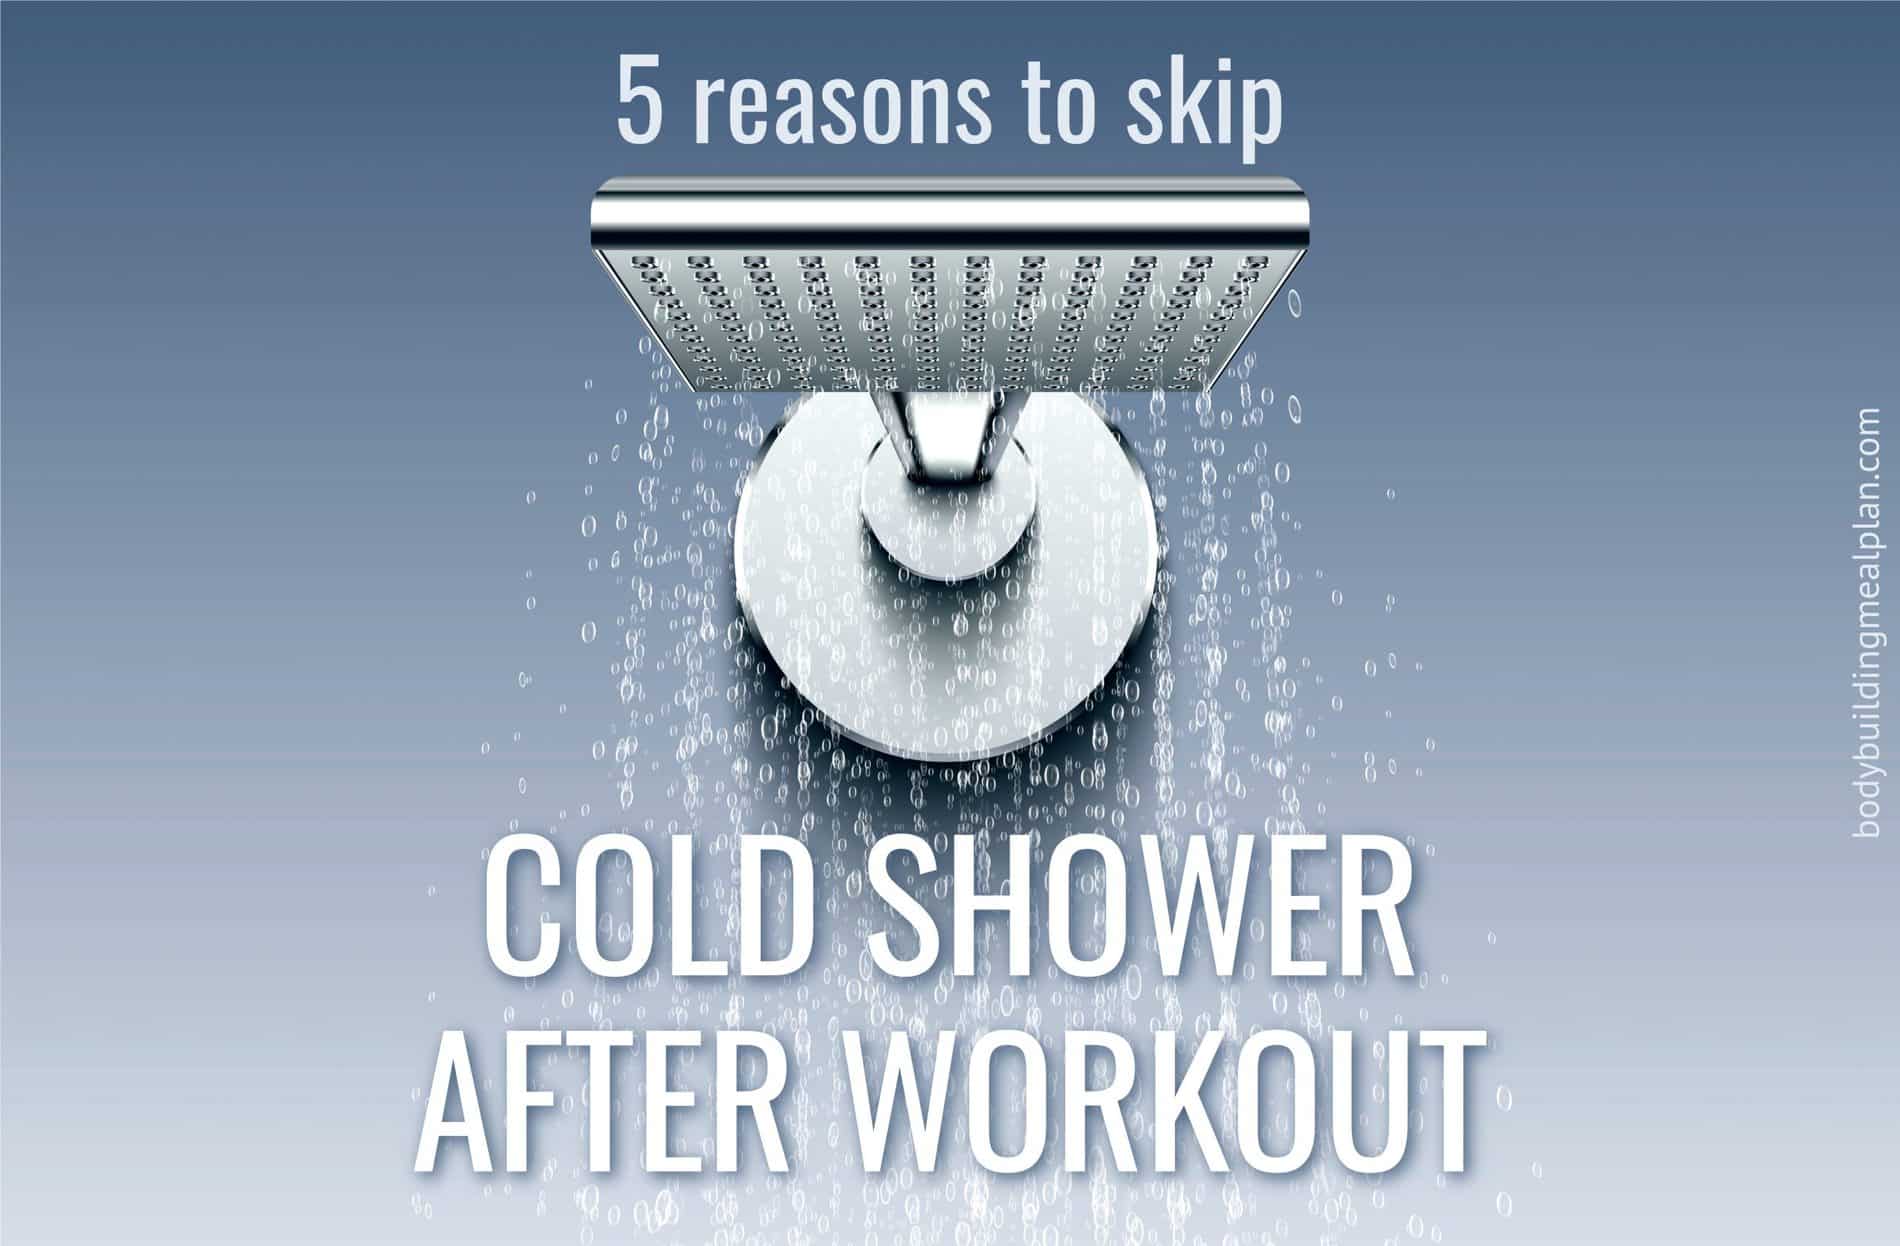 Clear Reasons Not To Take A Cold Shower After Workout